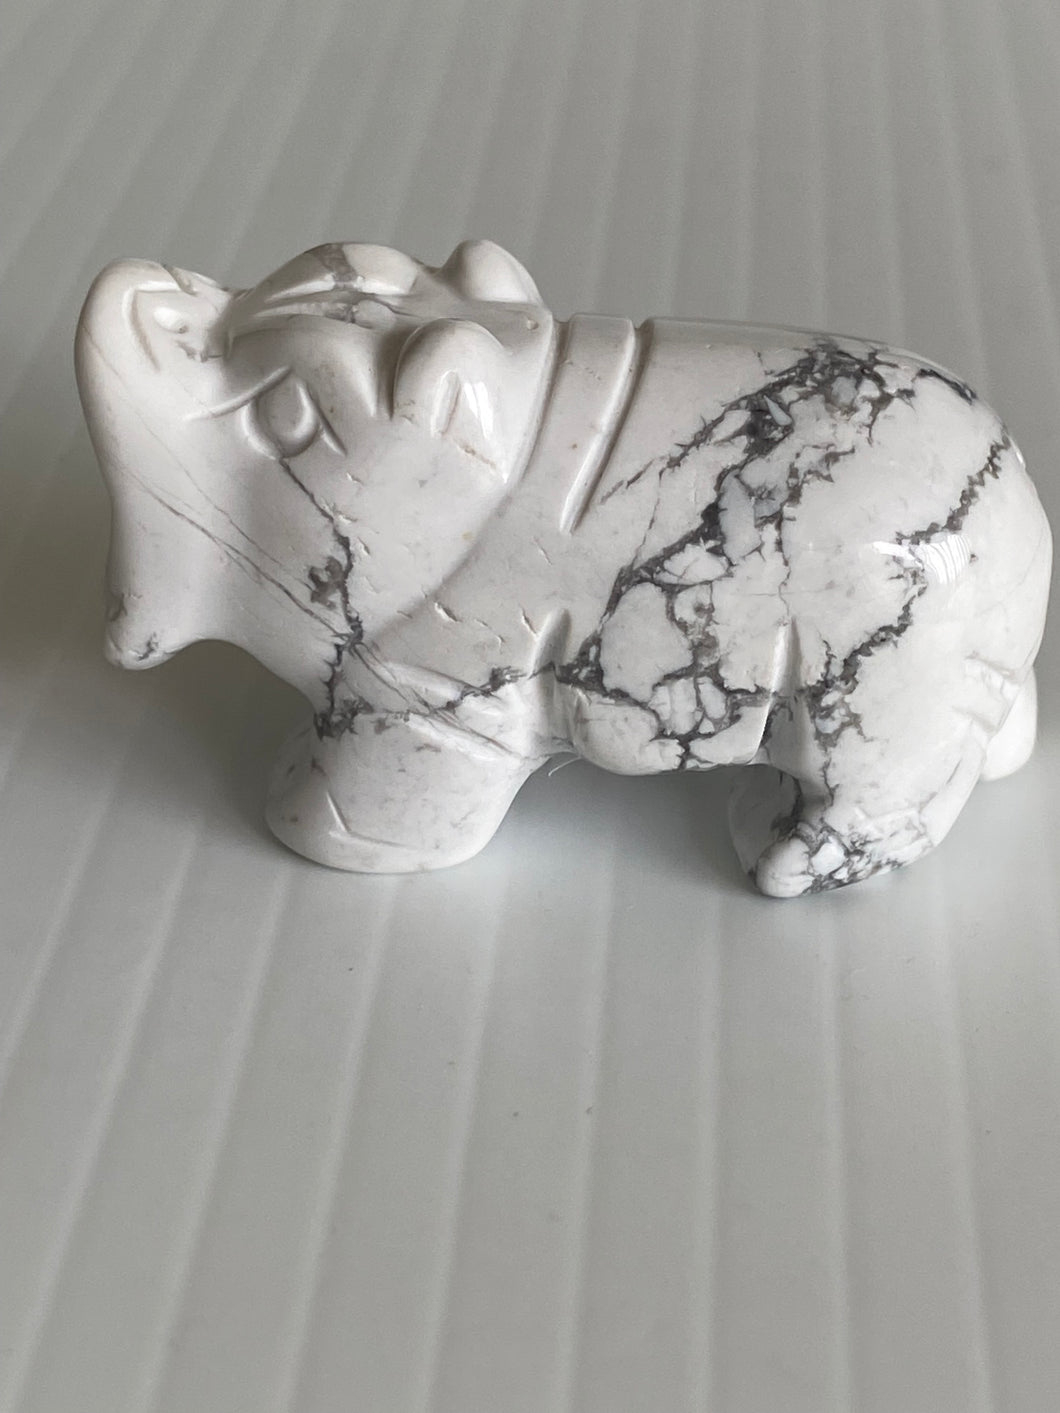 Hippo Stone Carving